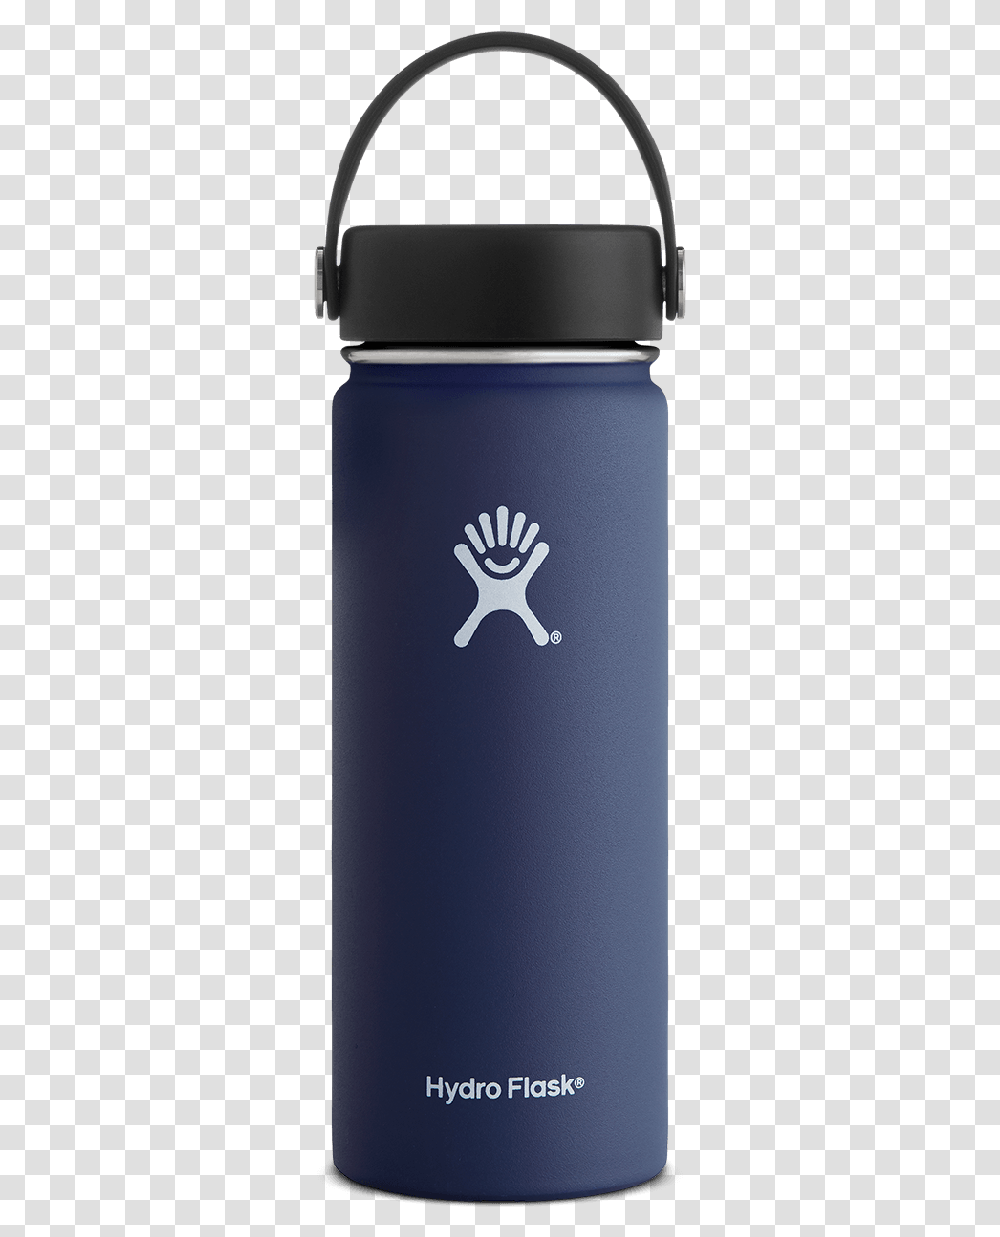 Hydro Flask Navy Blue, Mobile Phone, Electronics, Bottle Transparent Png